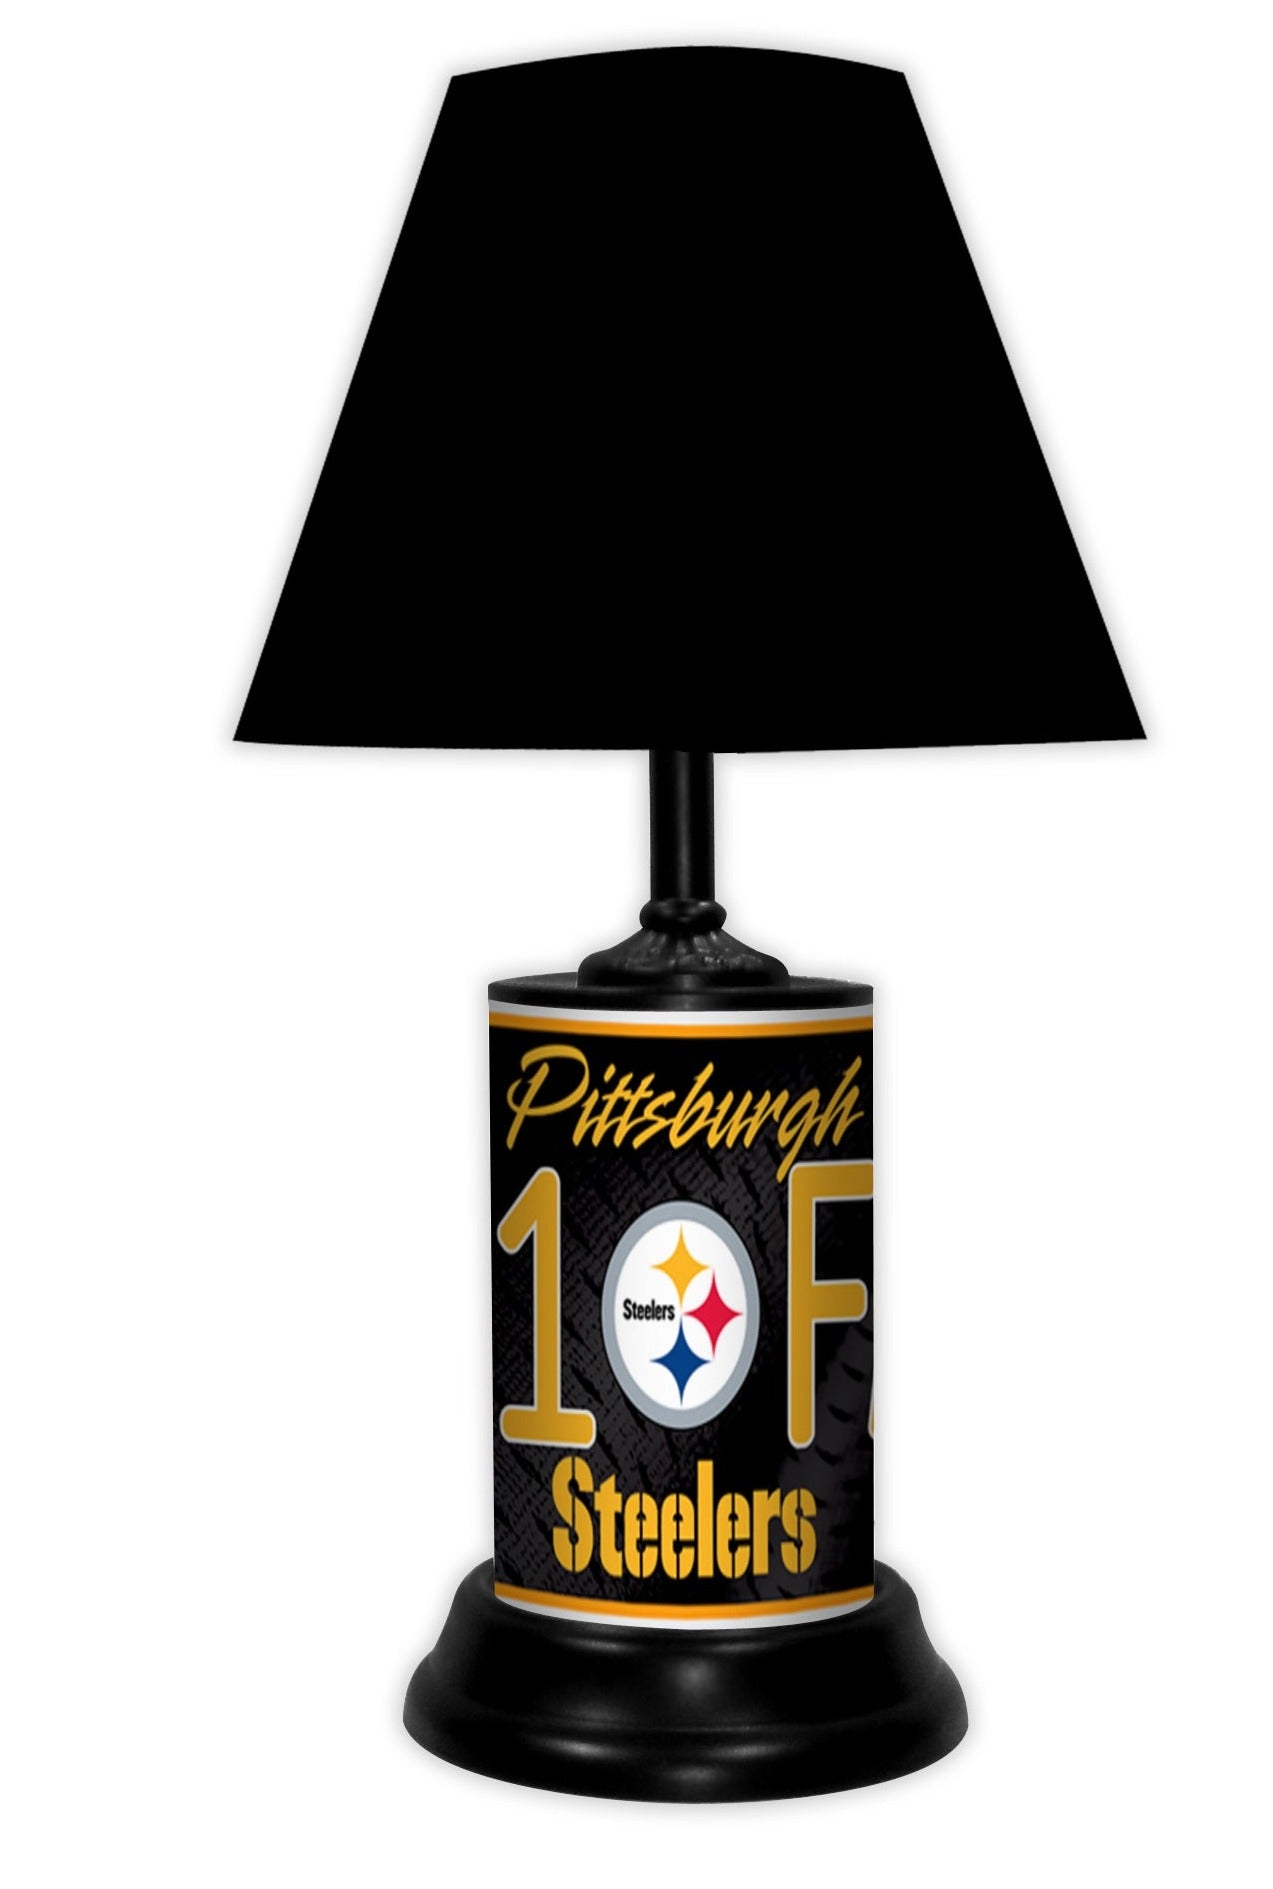 USA-made Steelers NFL #1 Fan Lamp, 18.5" tall, logo & #1 fan phrase, official, electric cord, perfect for die-hard fans.